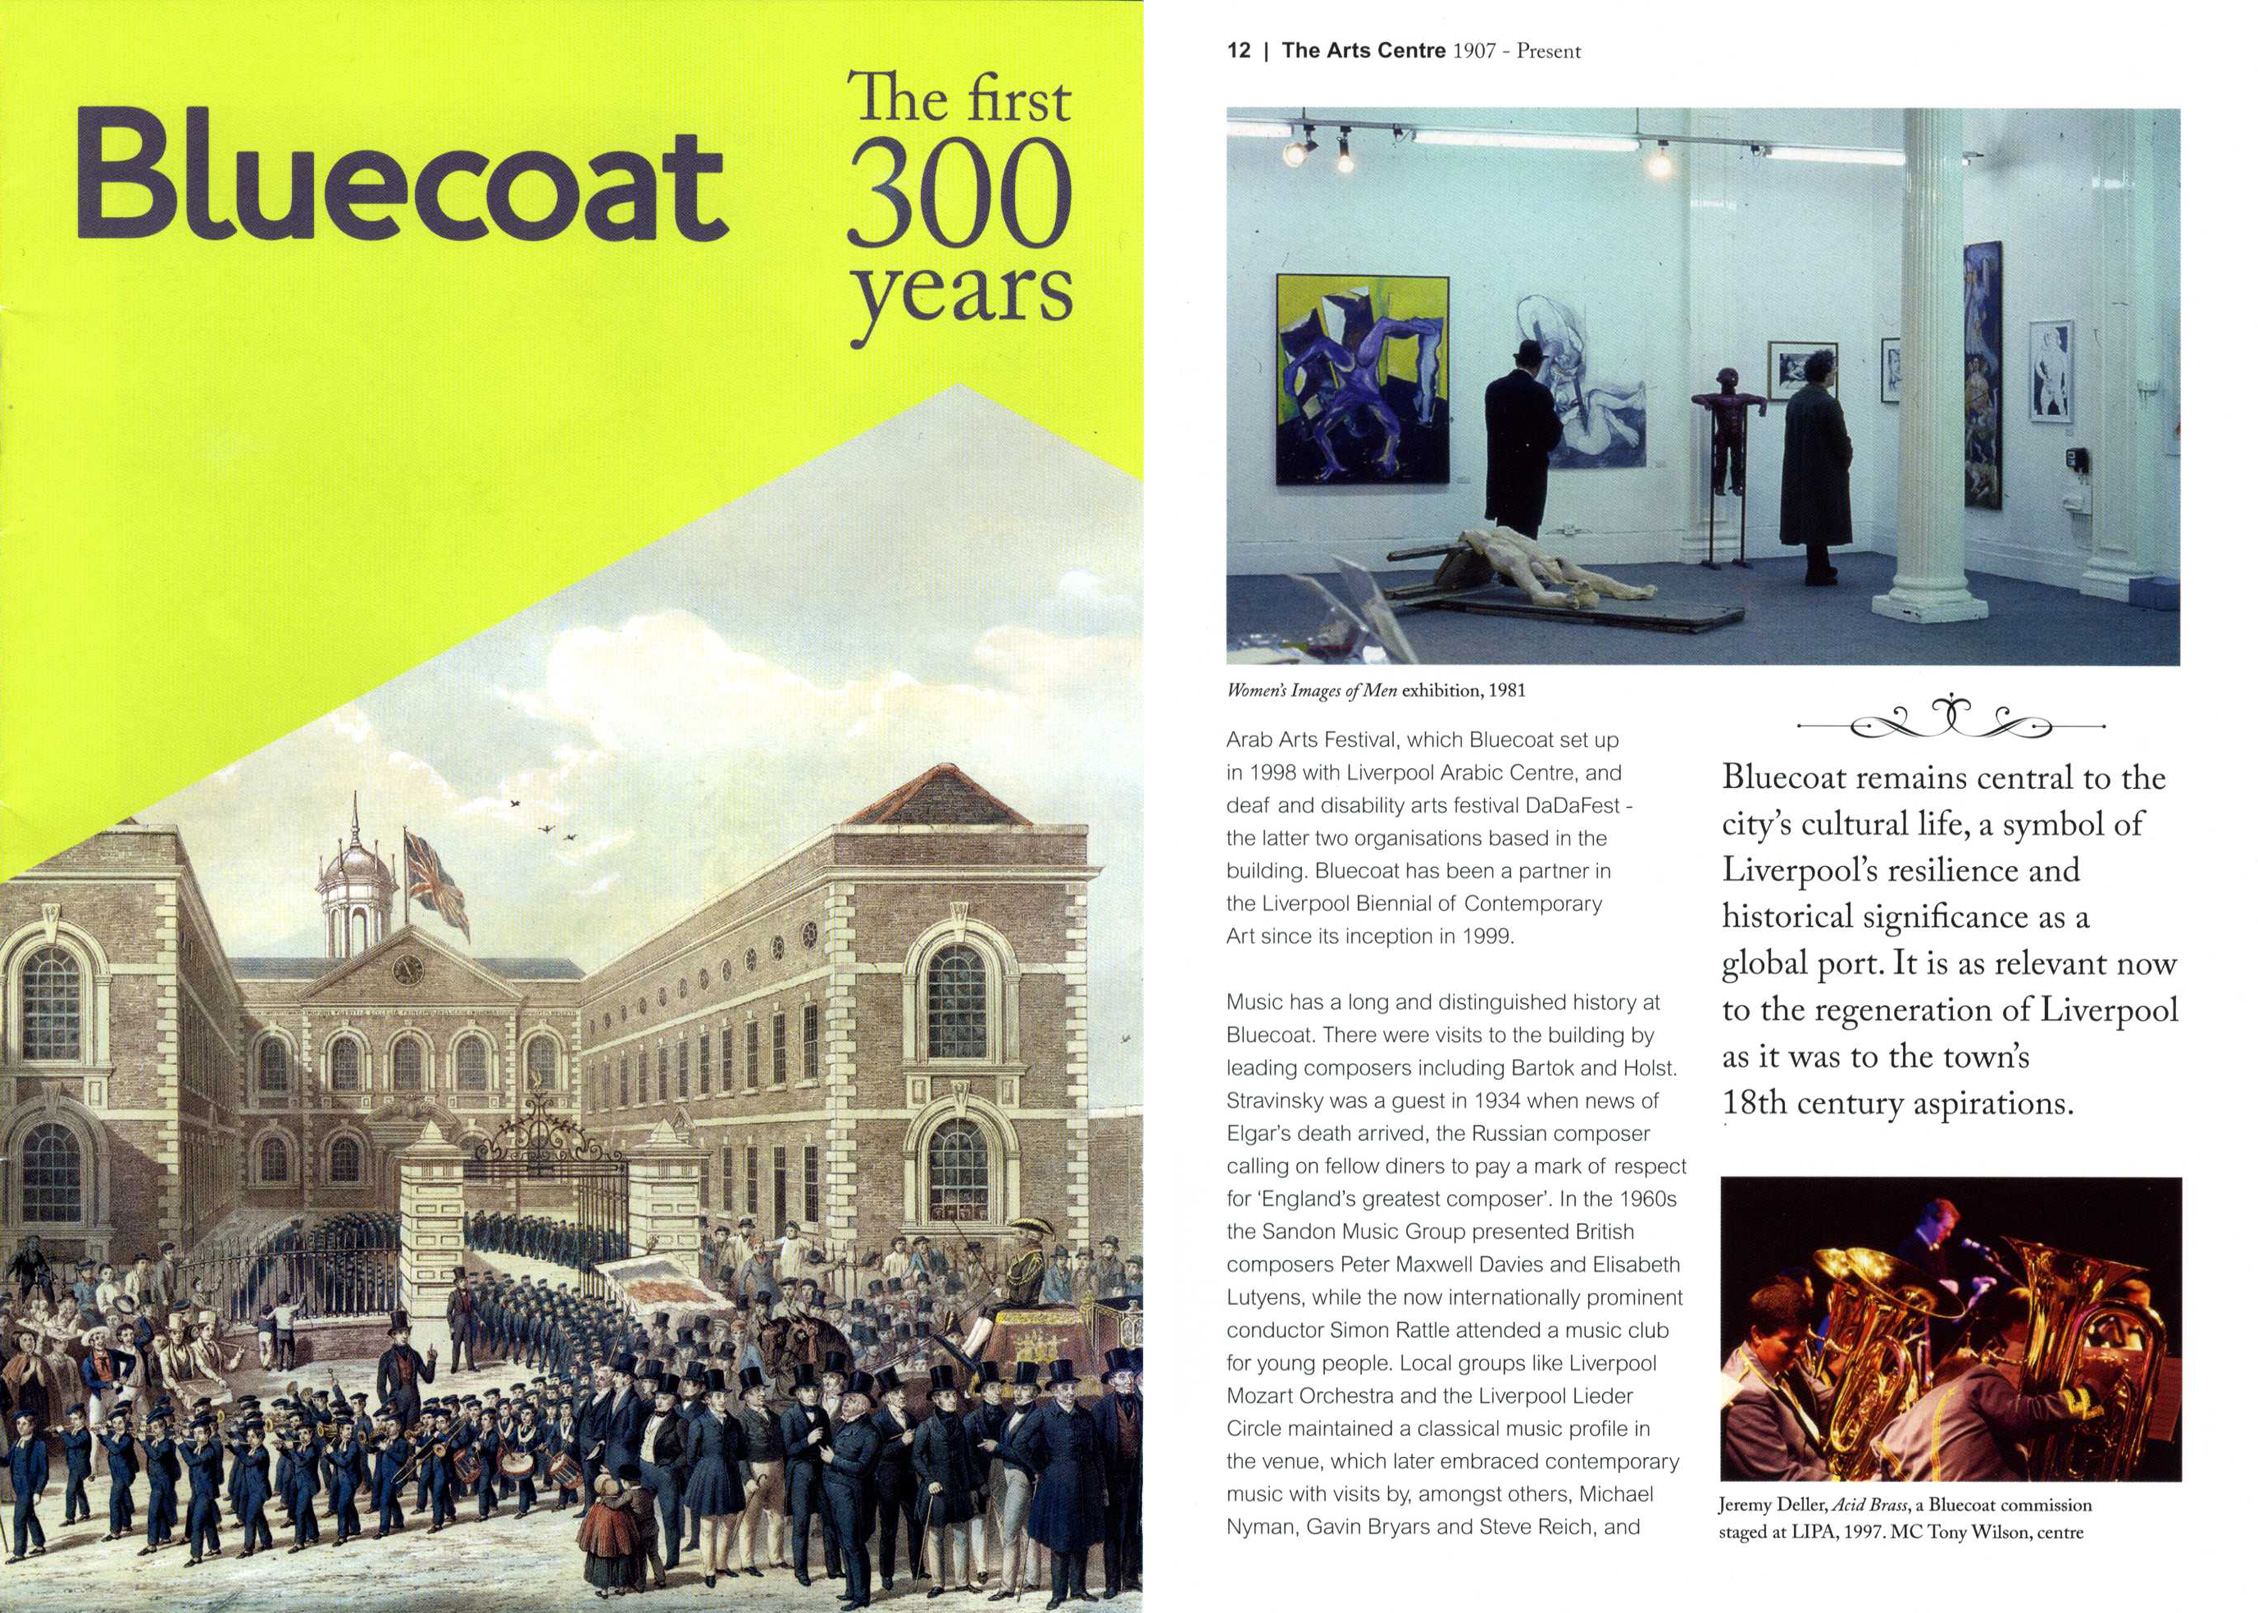 Bluecoat: The First 300 Years